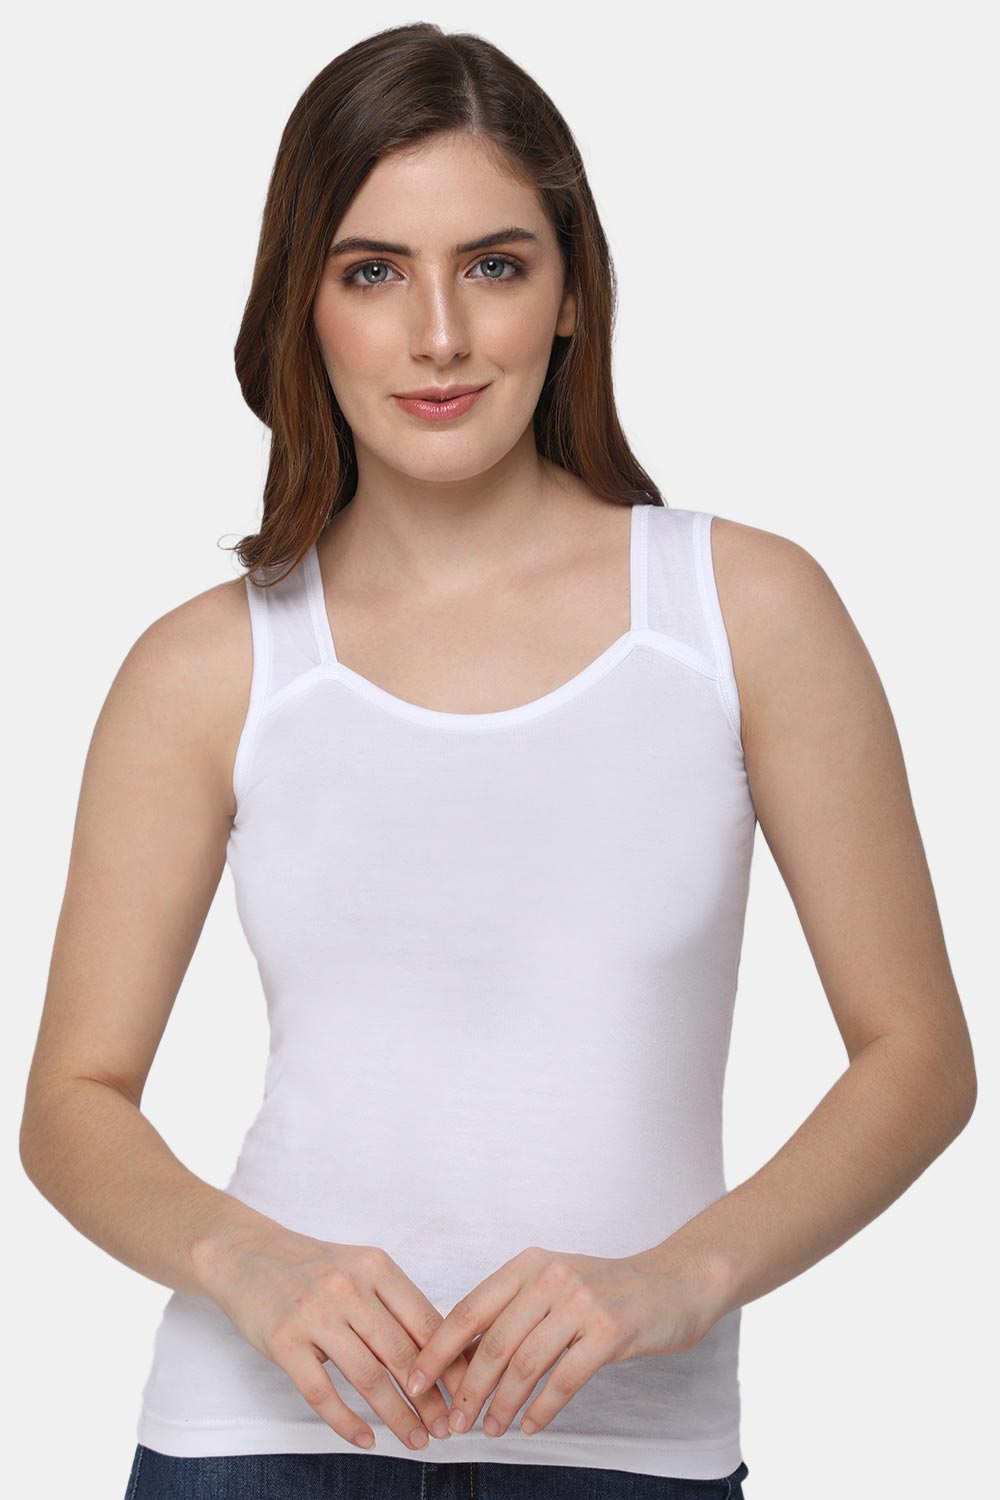 Intimacy Tank-Top Special Combo Pack - In07 - Pack of 3 - C42